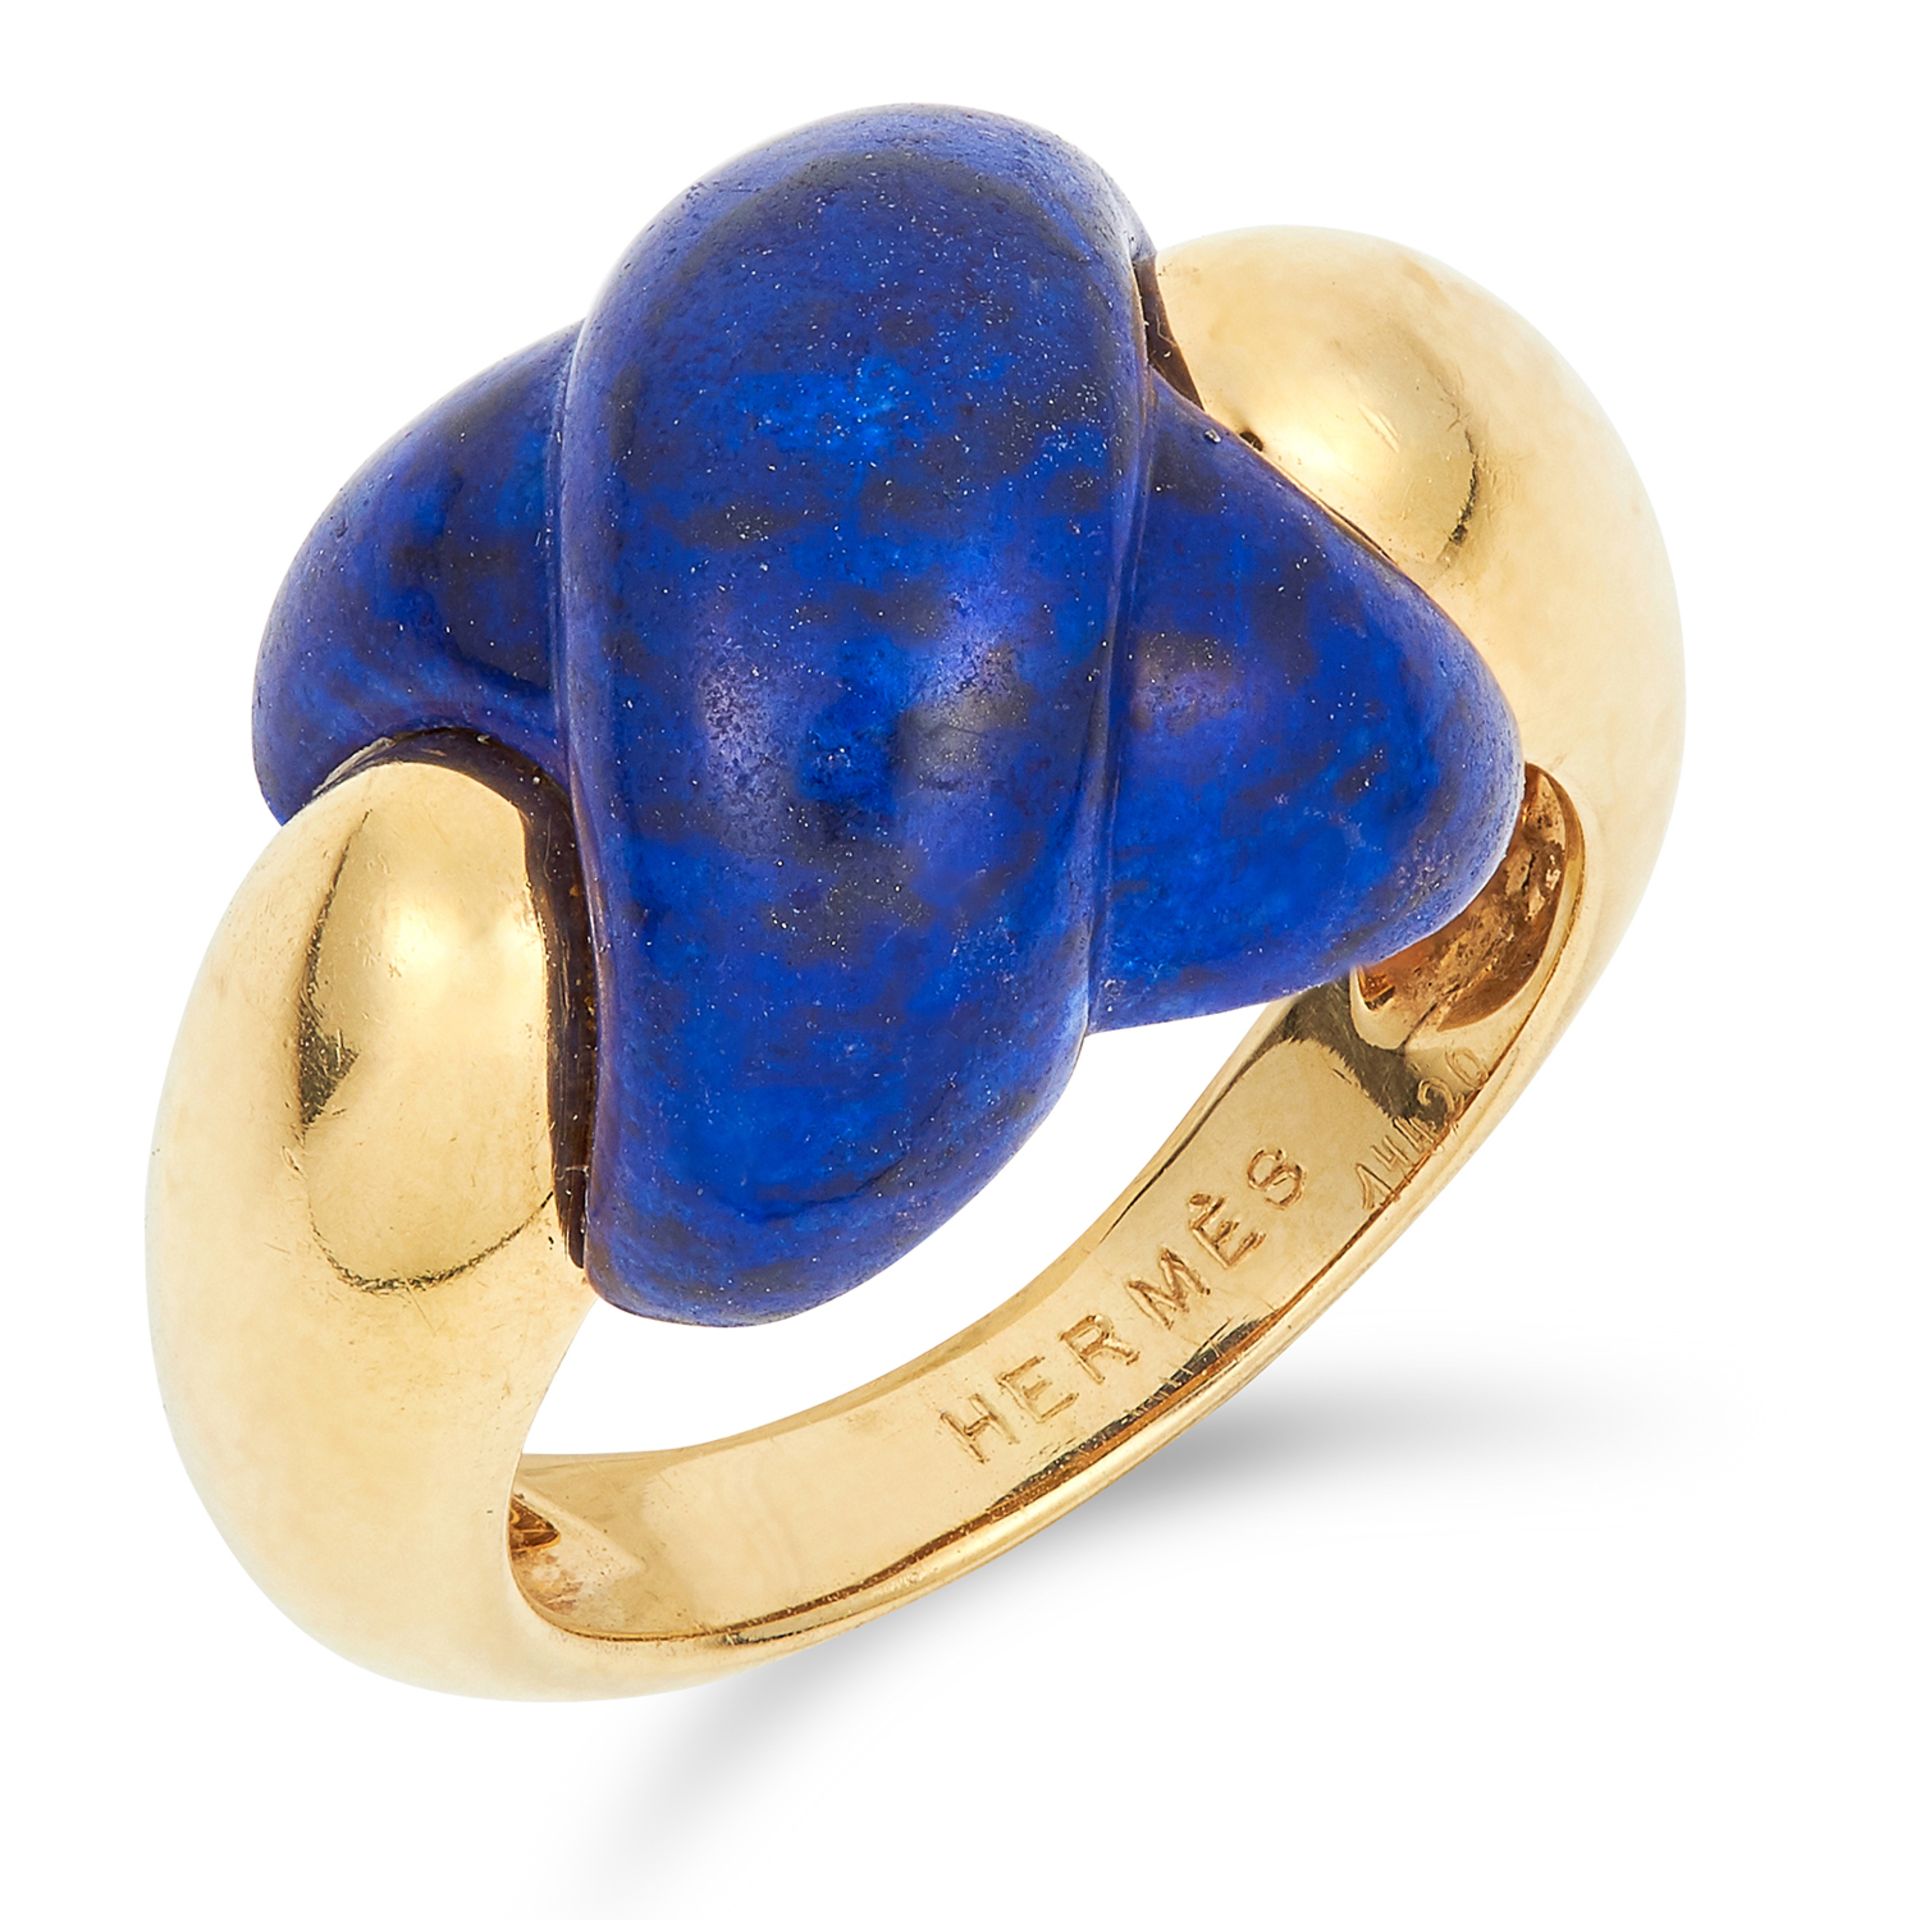 HERMES LAPIS LAZULI DRESS RING, the lapis carved in knot formation, size L / 6, 7.5g. - Image 2 of 2